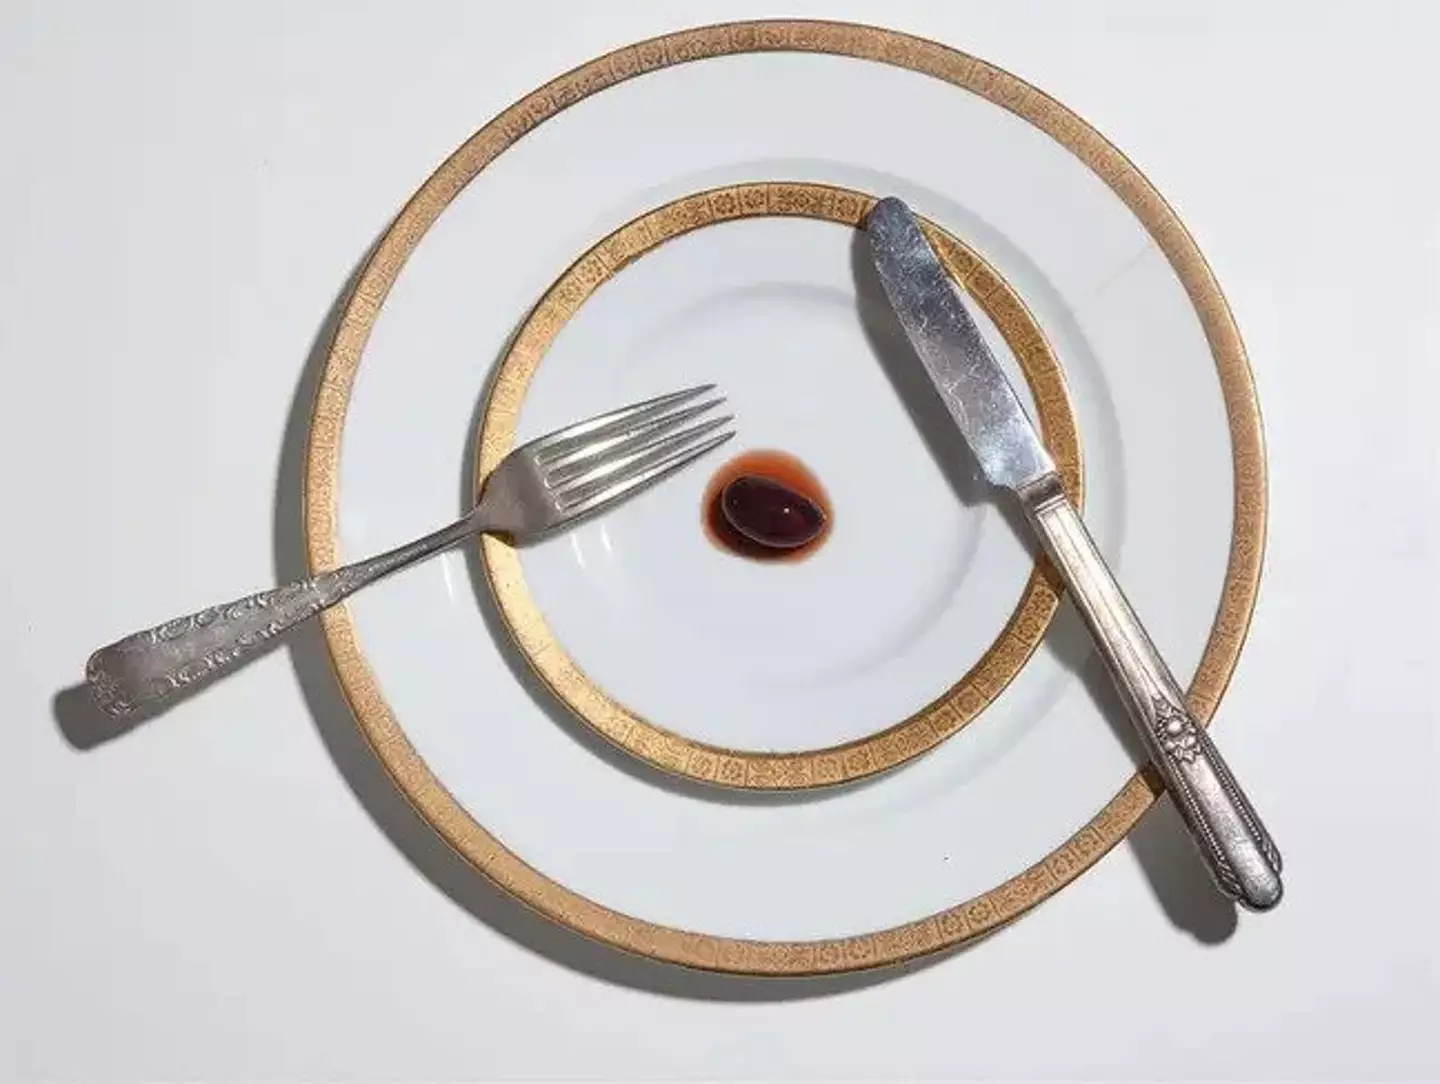 Henry Hargreaves recreated the meal in his photo series.